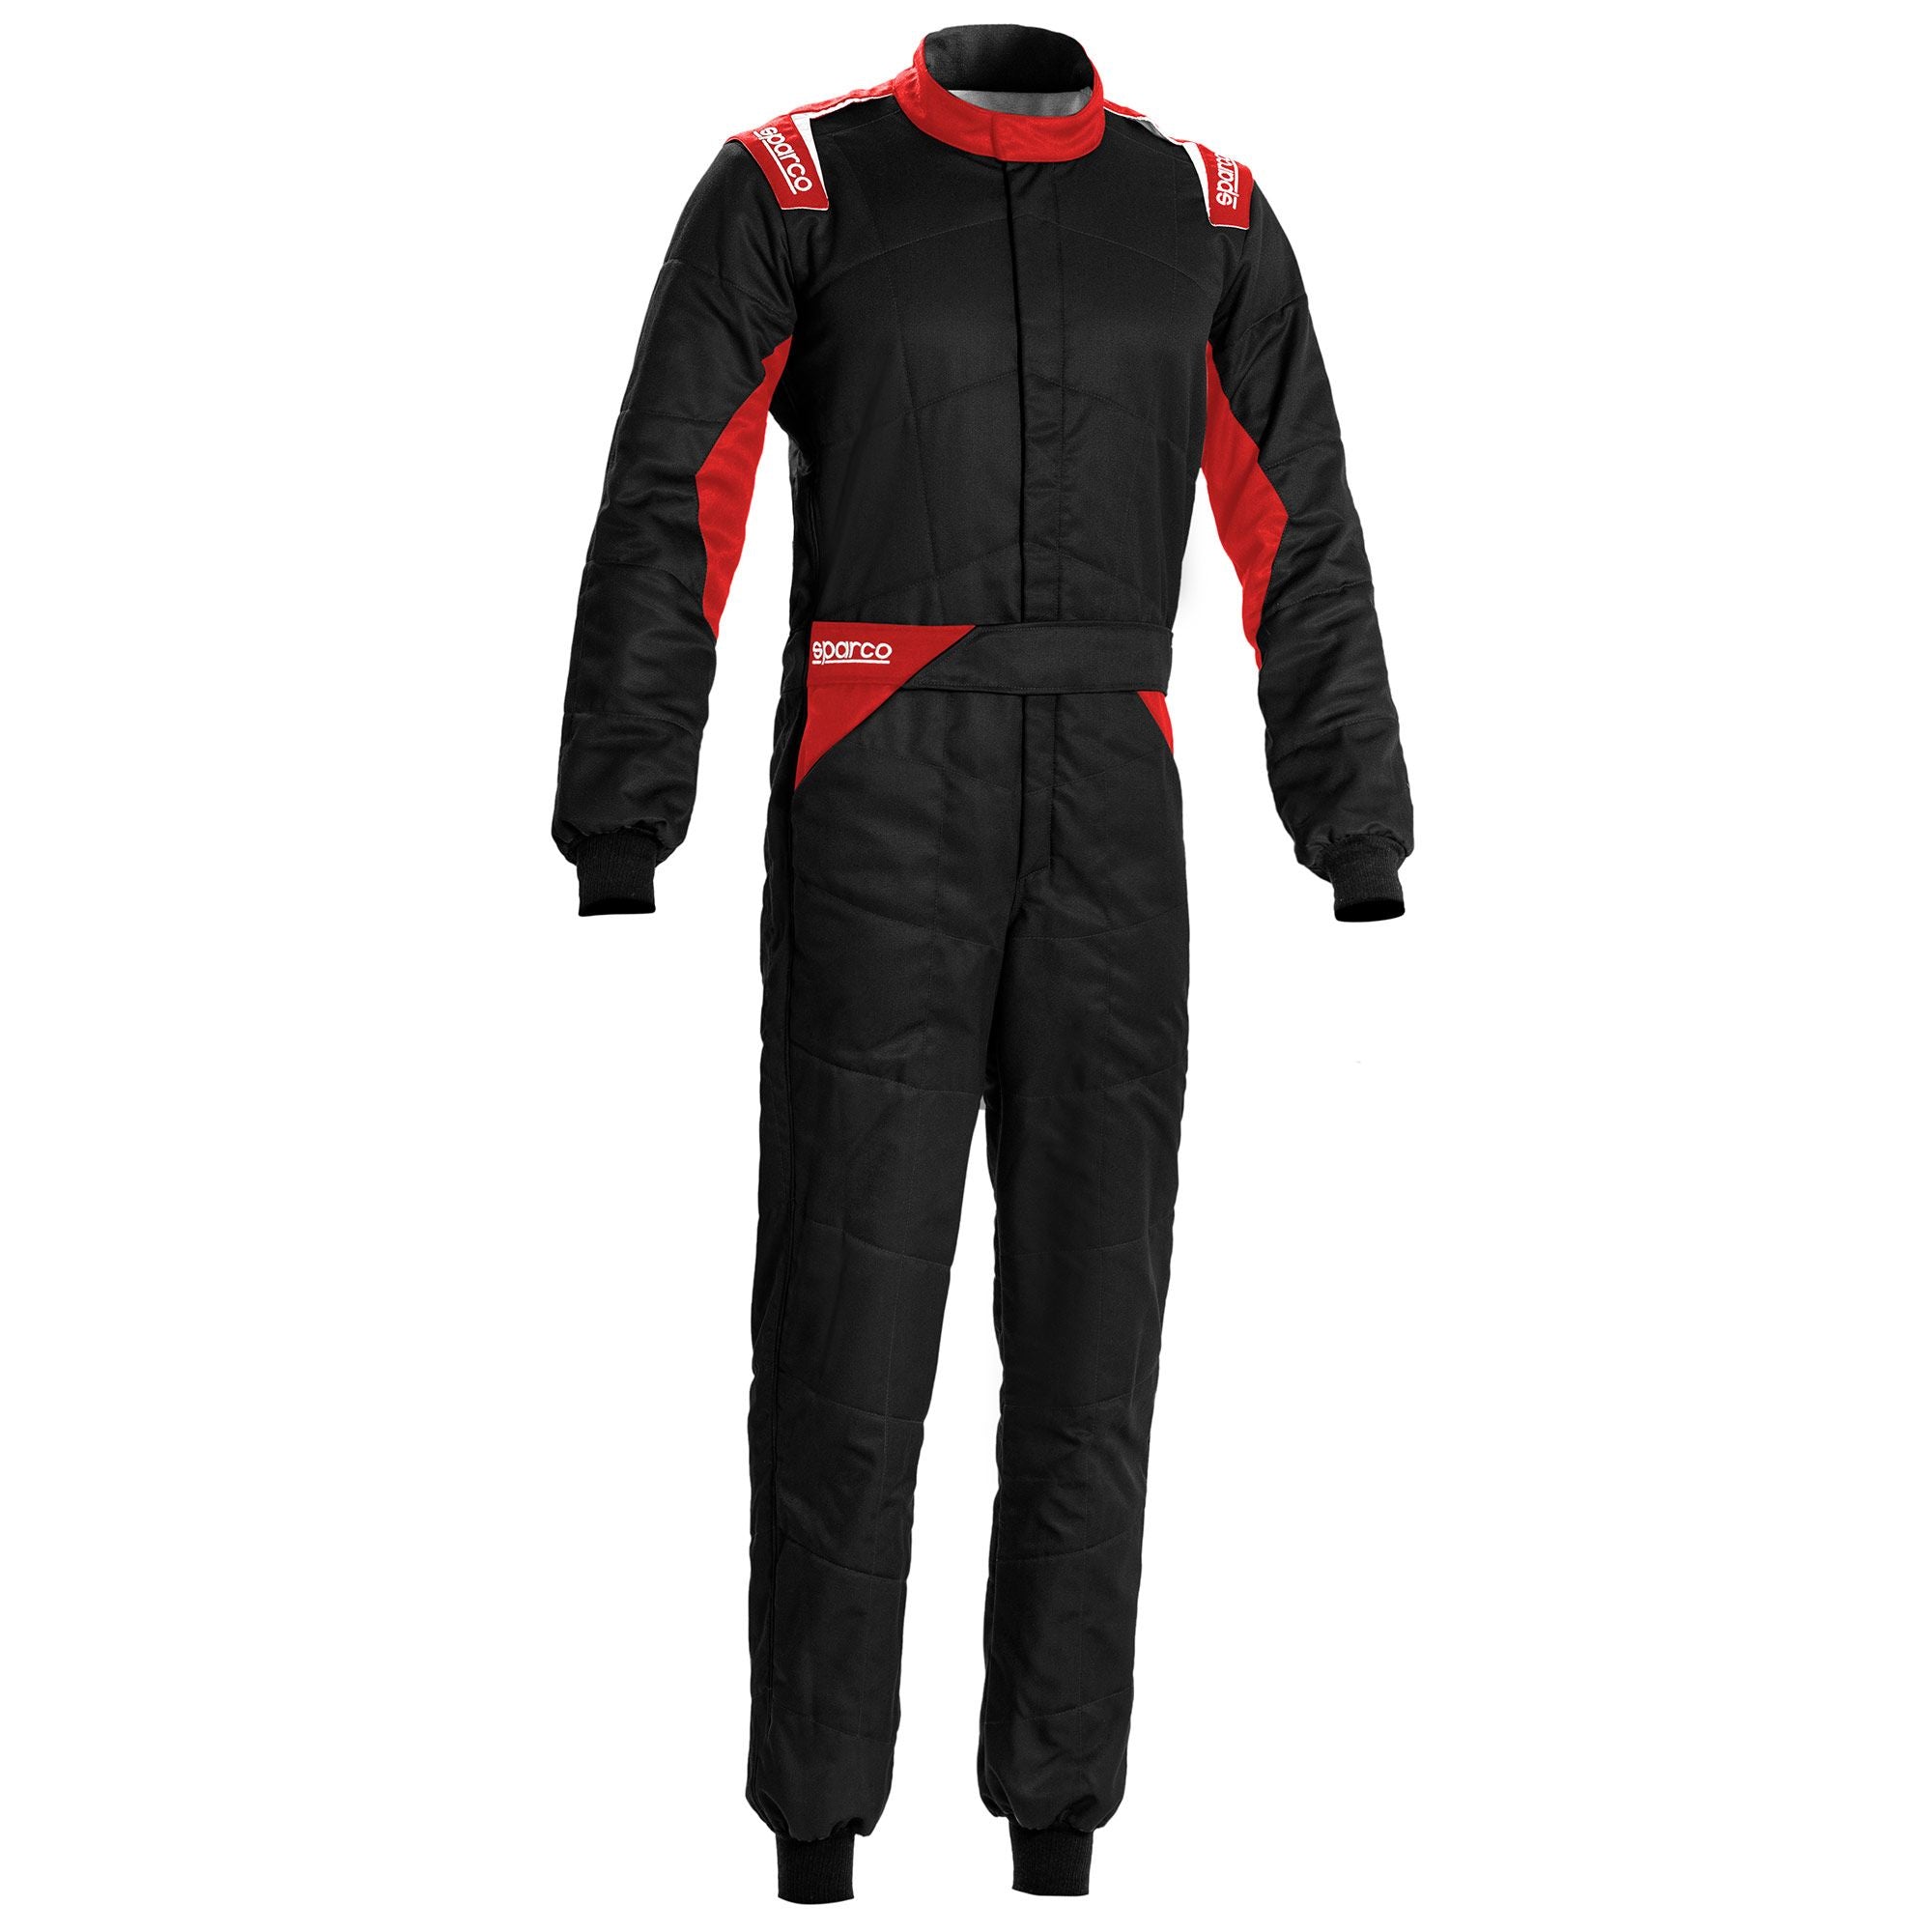 SPARCO 00109366NRRS SPRINT 2022 Racing suit, FIA 8856-2018, black/red, size 66 Photo-0 